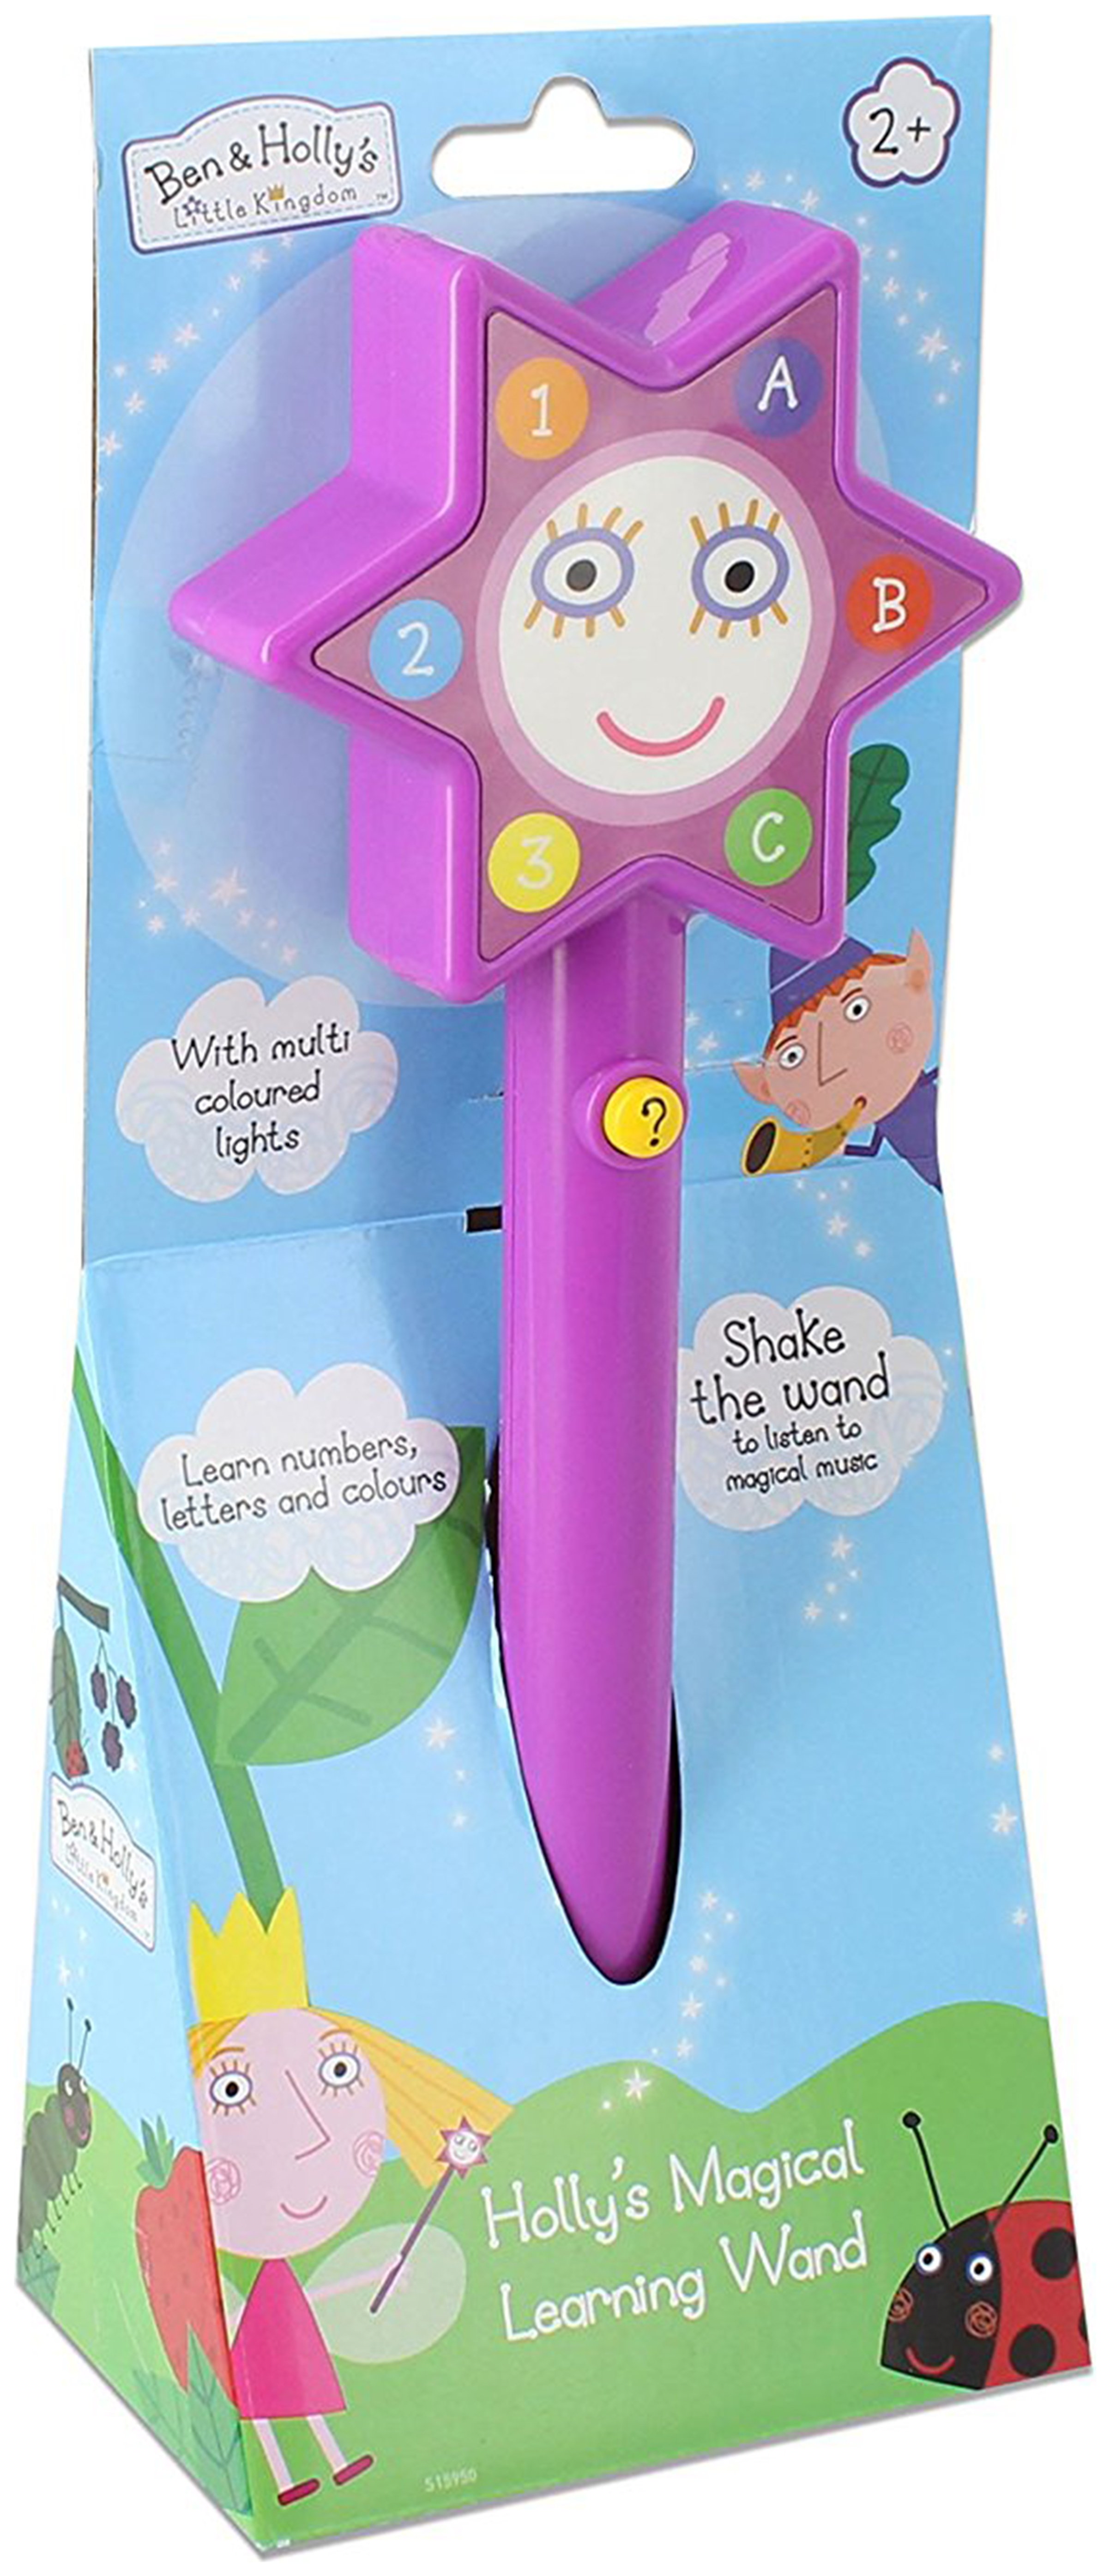 Ben & Holly's Little Kingdom Magical Wand Review